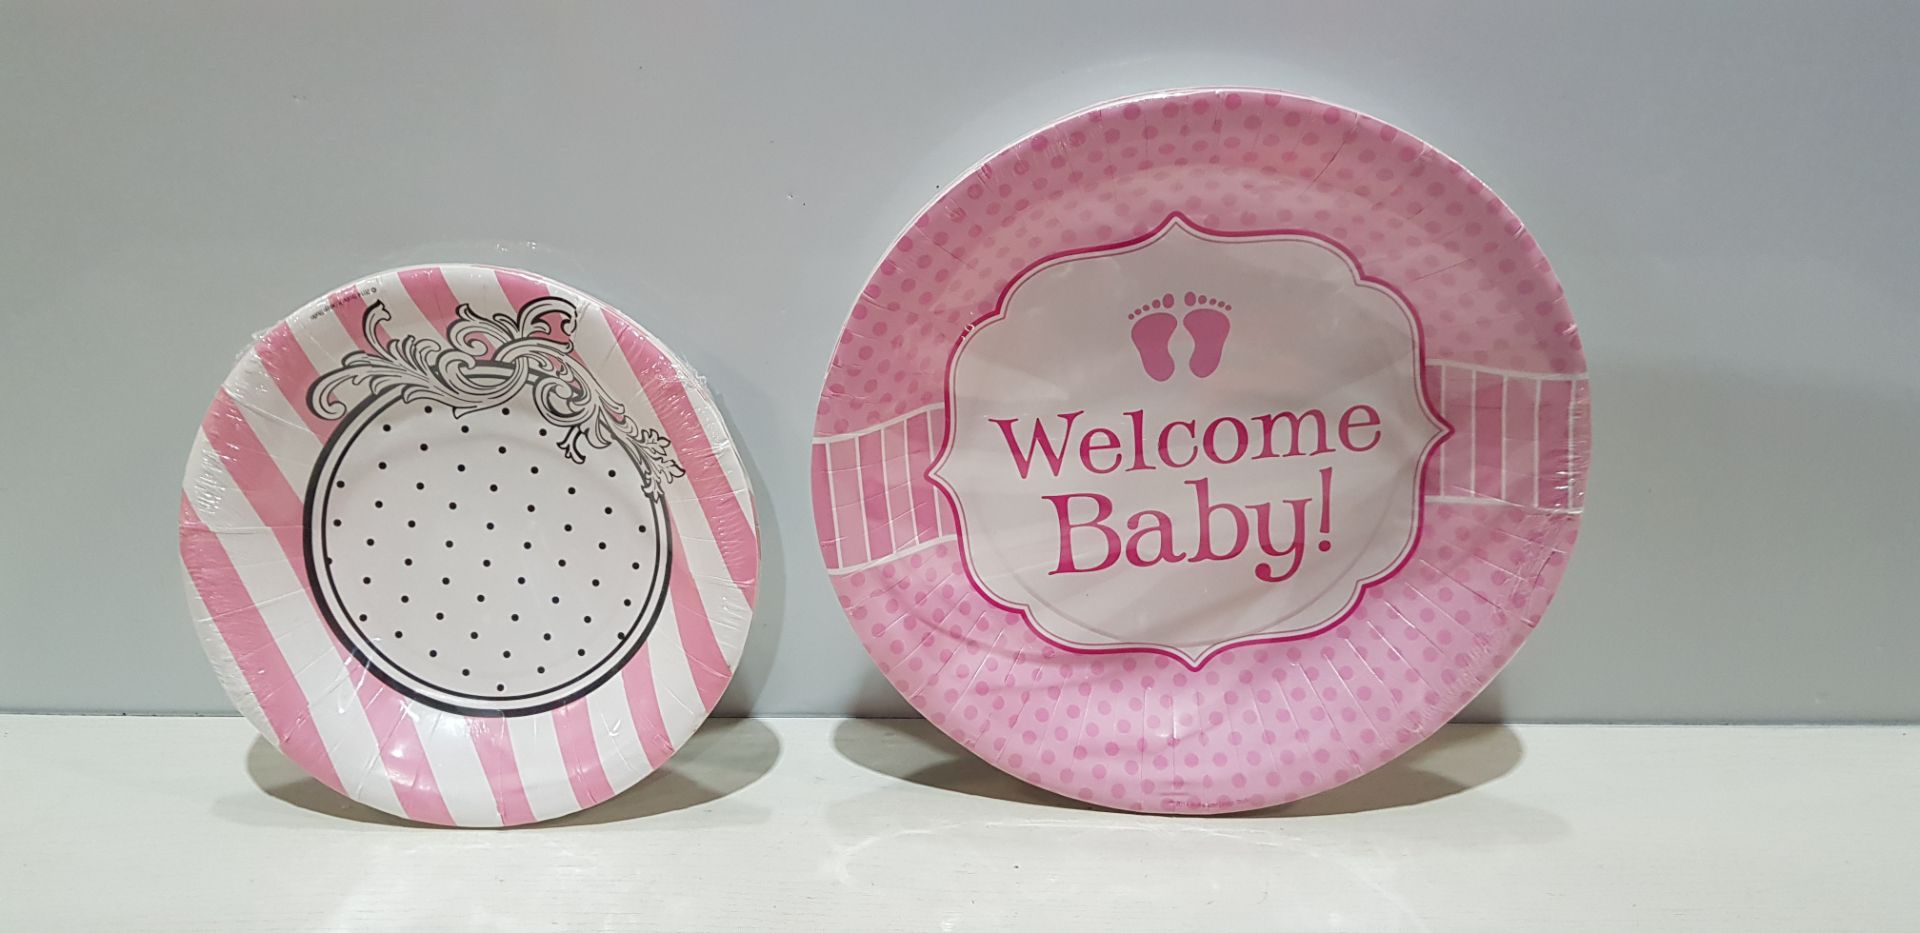 360 PACKS OF 10 BRAND NEW PAPER PARTY PLATES I.E - WELCOME BABY IN PINK - PINK DESIGNED PLATES- 26CM